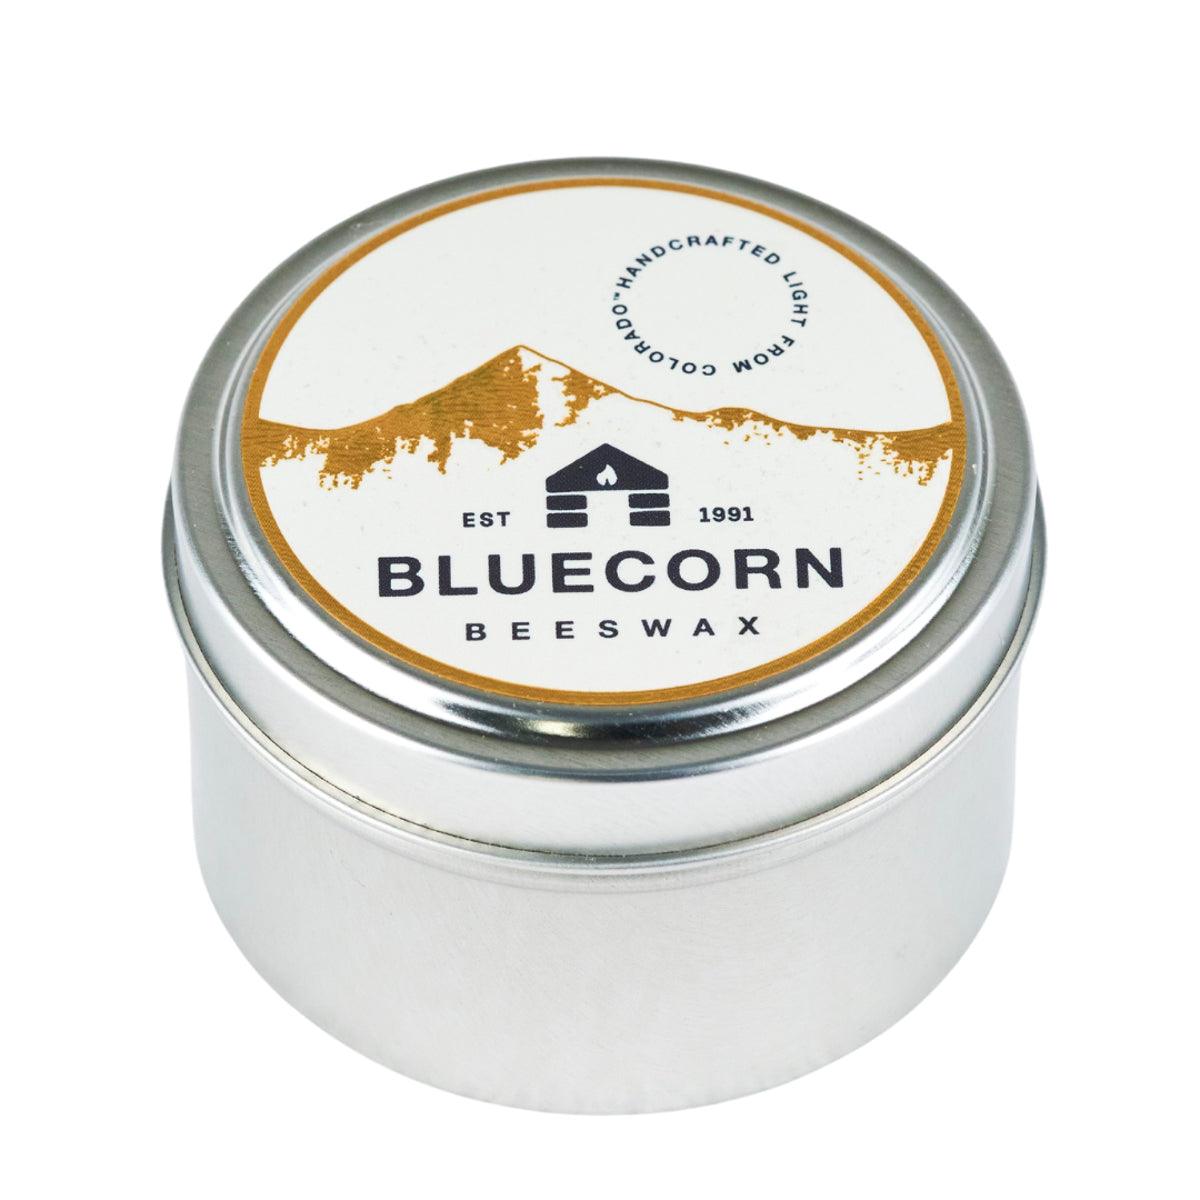 Bluecorn Beeswax Raw Beeswax Travel Tin 6oz Candle. Handmade in Montrose, CO. Paraffin and Lead free and made with a cotton wick. Burn time 30 hours. Candle Dimensions: 2.75in (dia.) x 1.75in (ht.). Wax is golden in color and packaging features a white and gold foil sticker with the Bluecorn Logo. Great For: Traveling, Camping, Hotel Rooms, Gifts. Metal tins are recyclable or can be repurposed and reused. We do not take the tins back after the candle is burned.